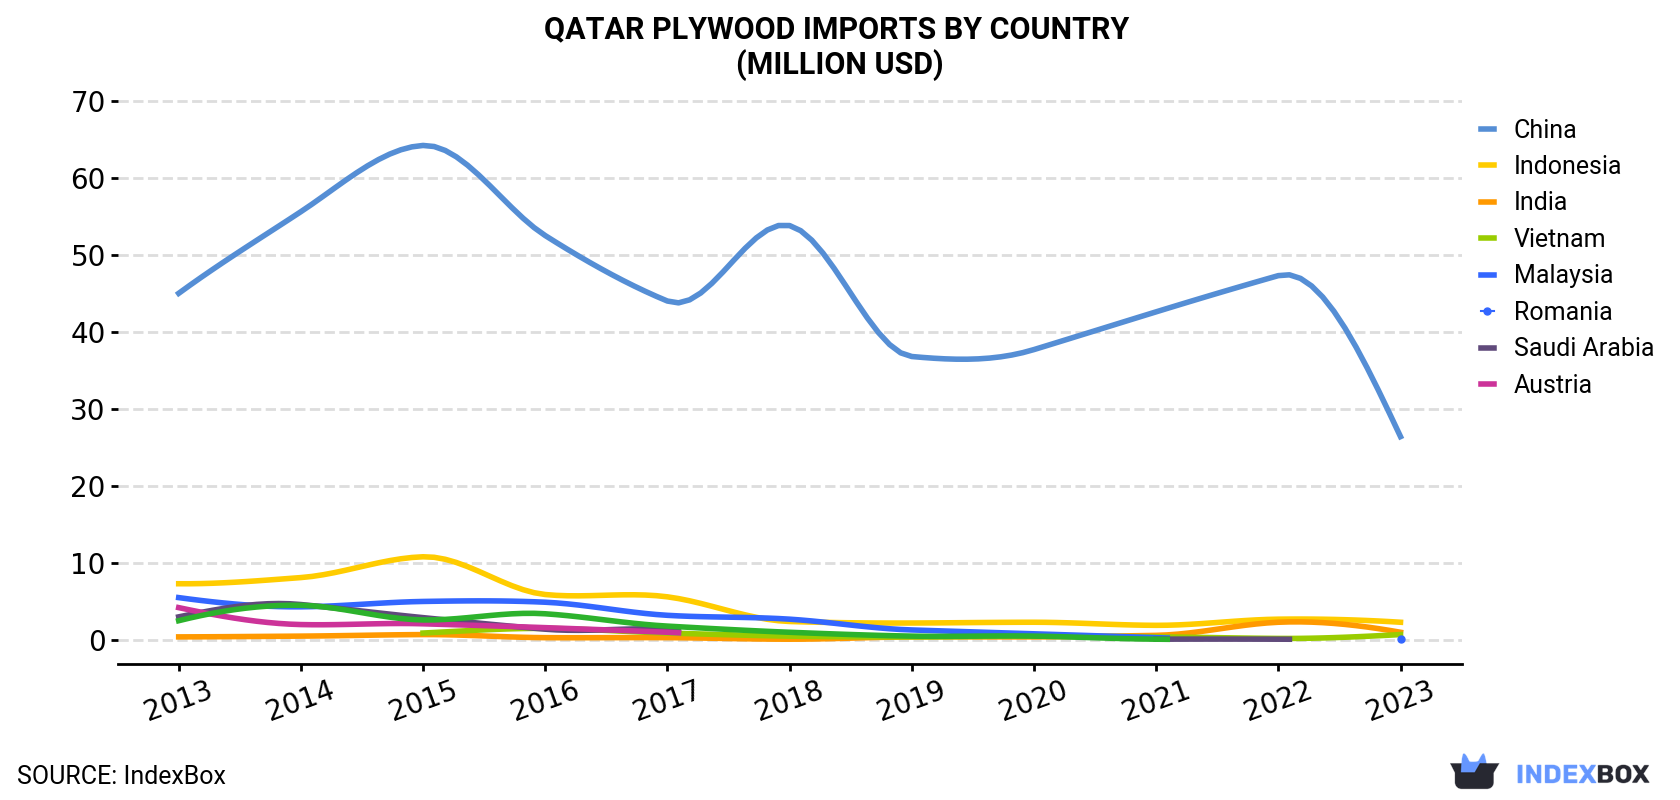 Qatar Plywood Imports By Country (Million USD)